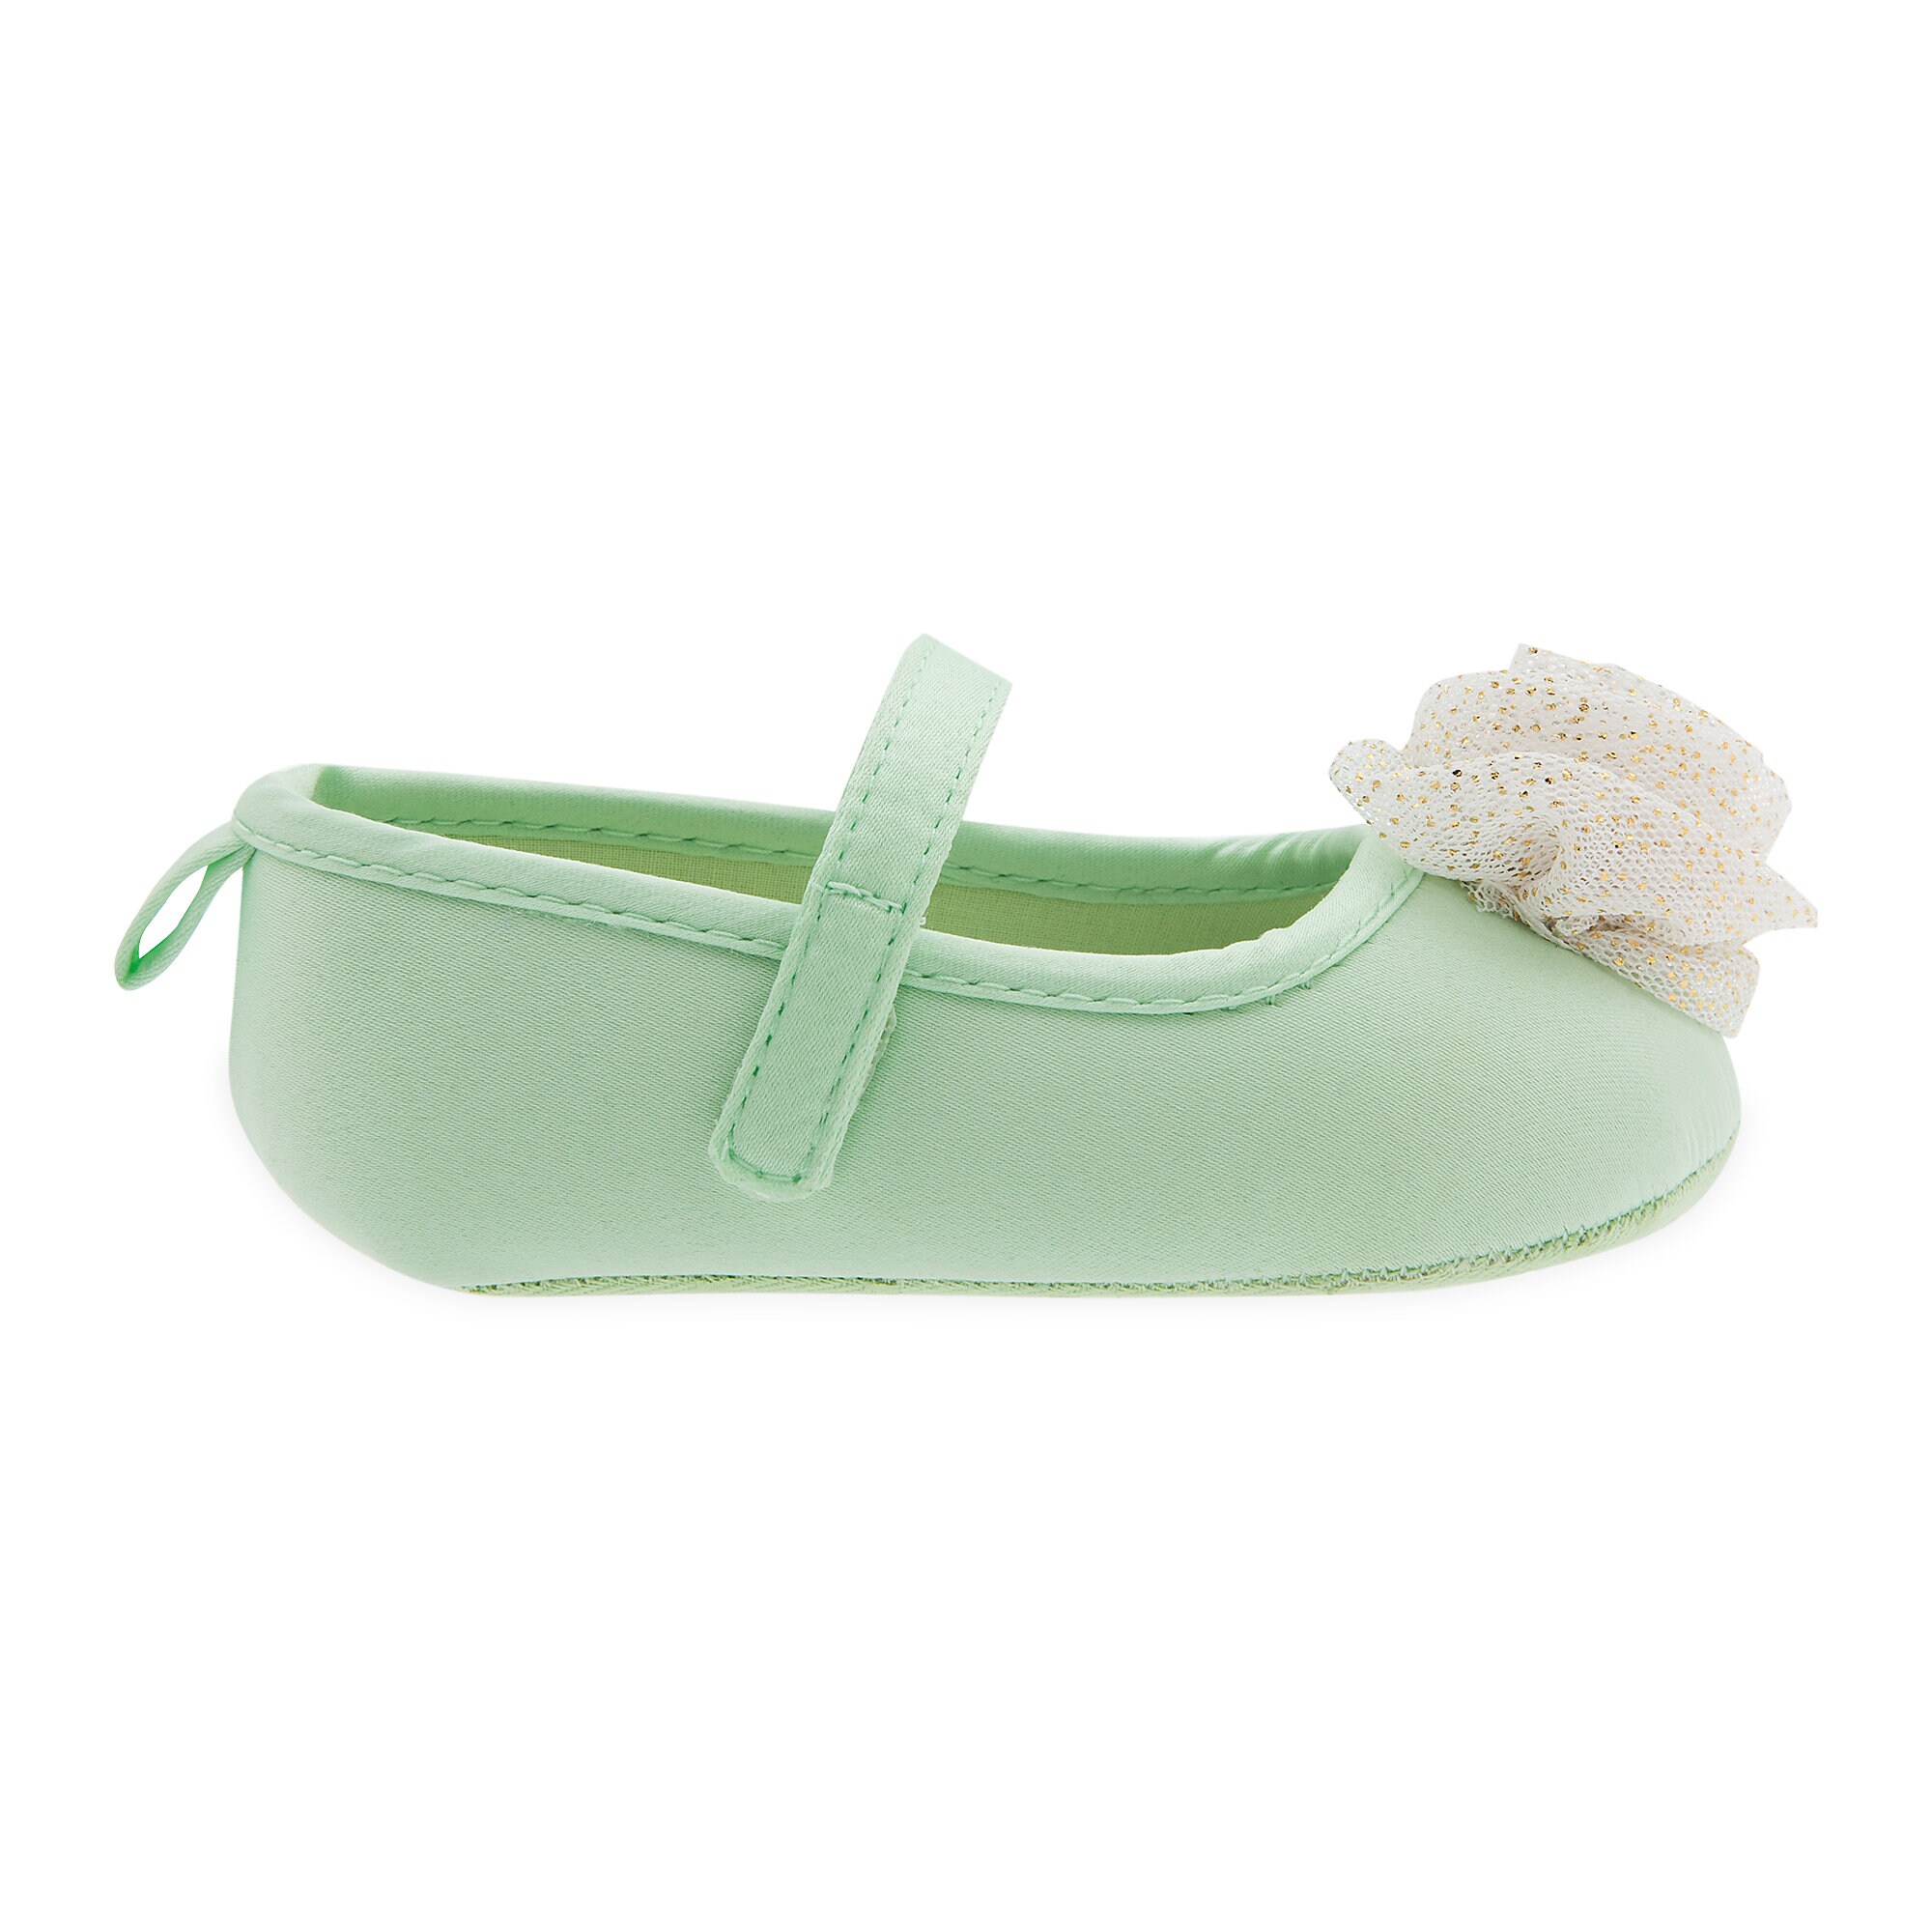 Tinker Bell Costume Shoes for Baby